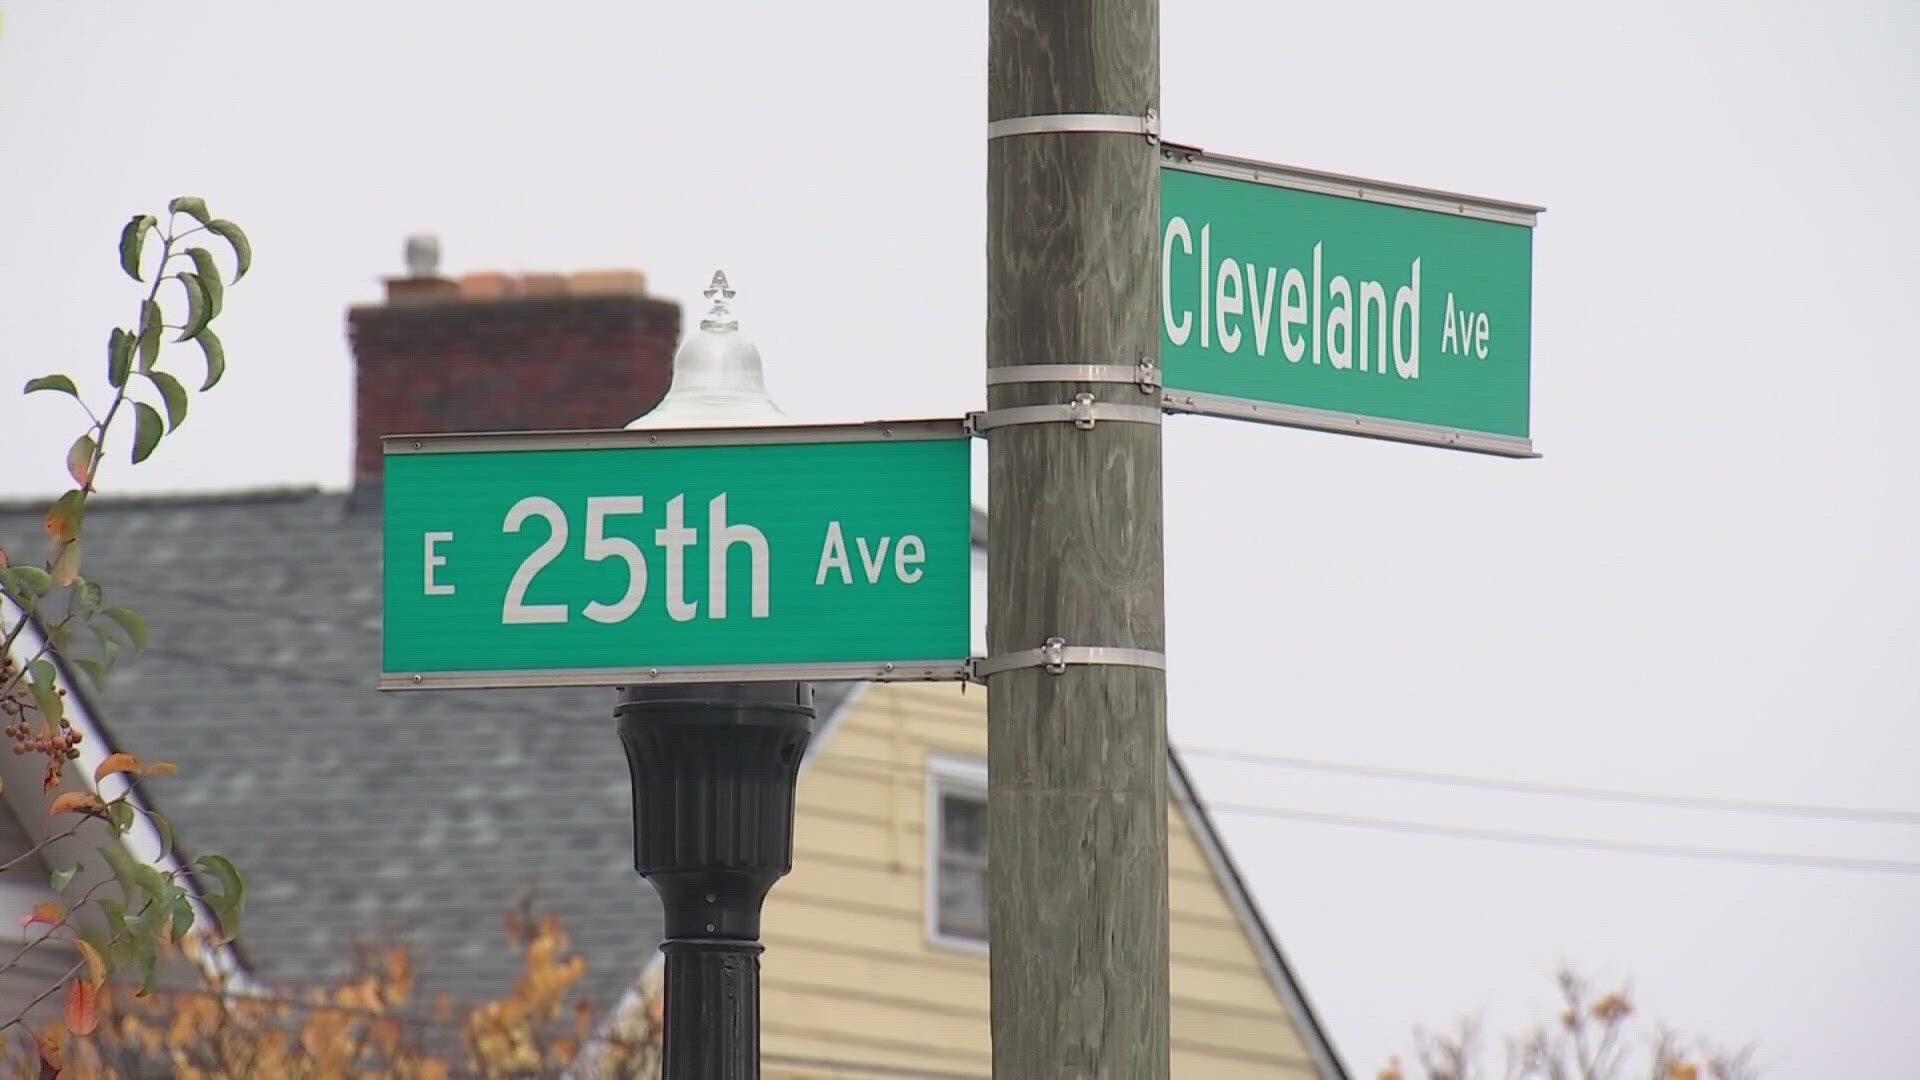 The group reportedly stopped in the middle of the road and was struck by a Hyundai Accent that was headed northbound on Cleveland Avenue.